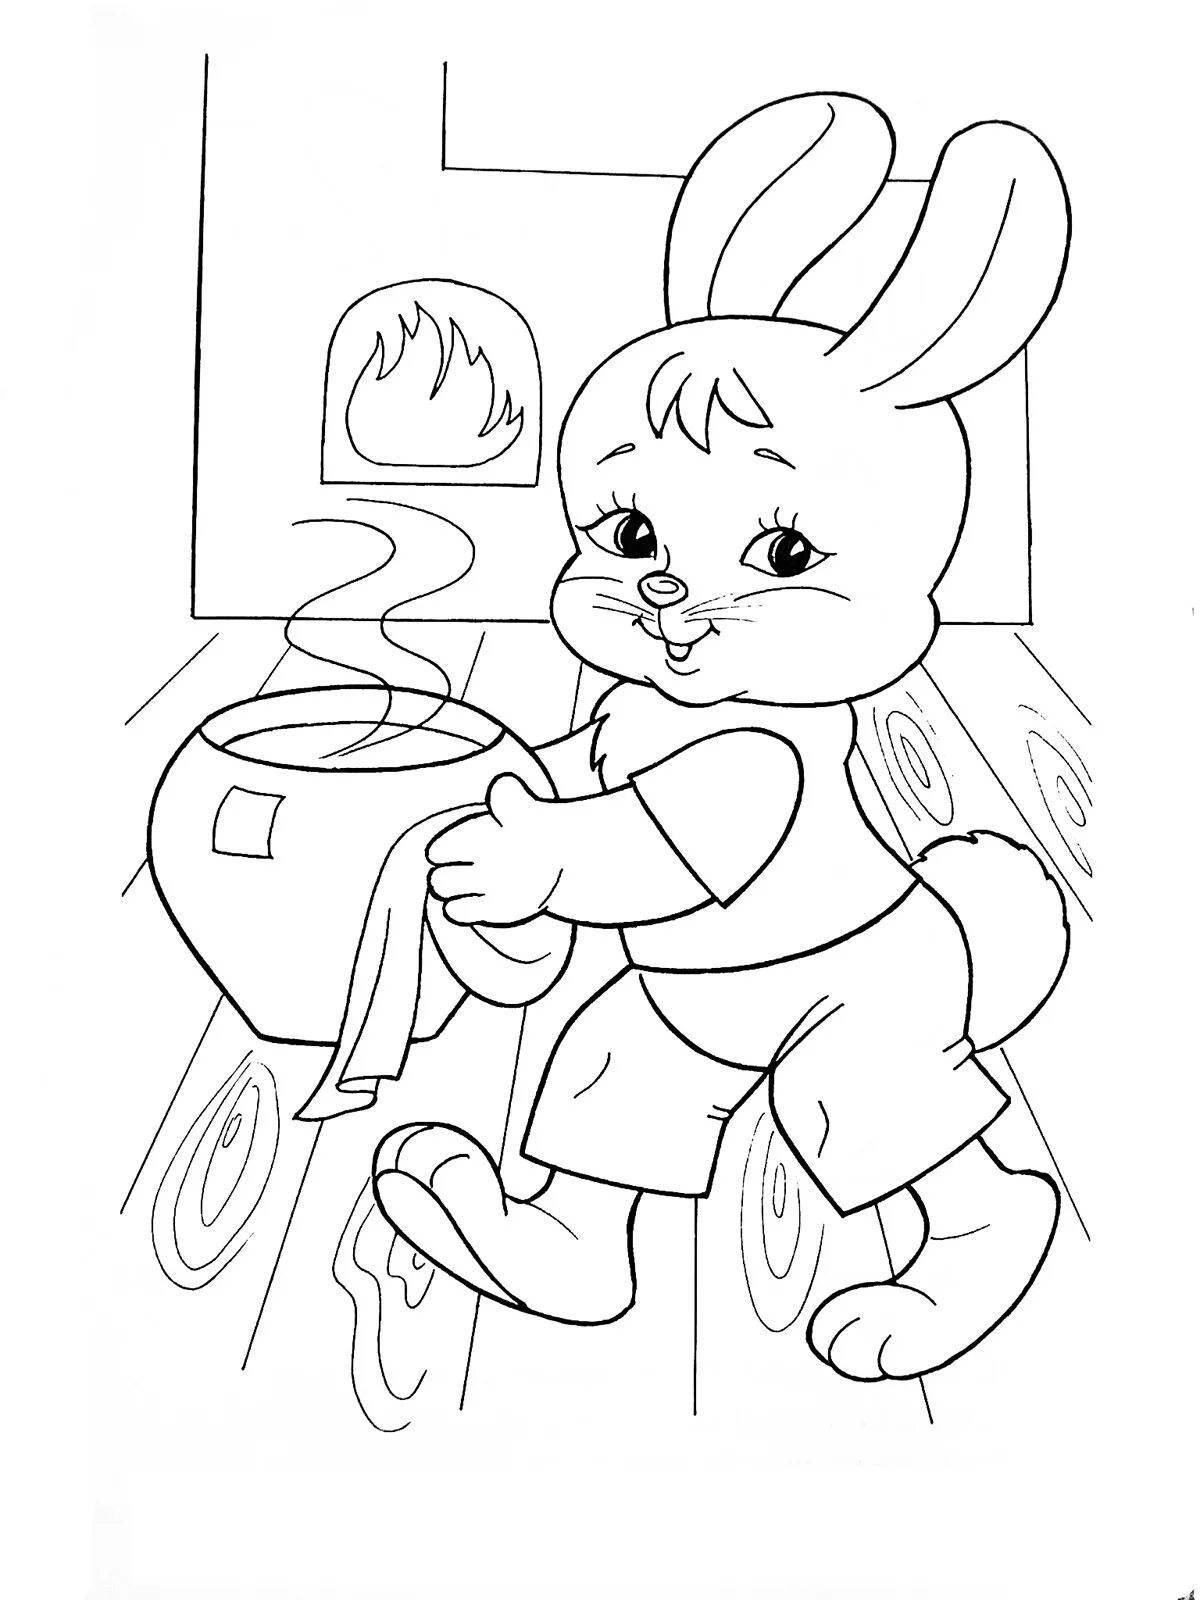 Delightful coloring pages heroes of fairy tales